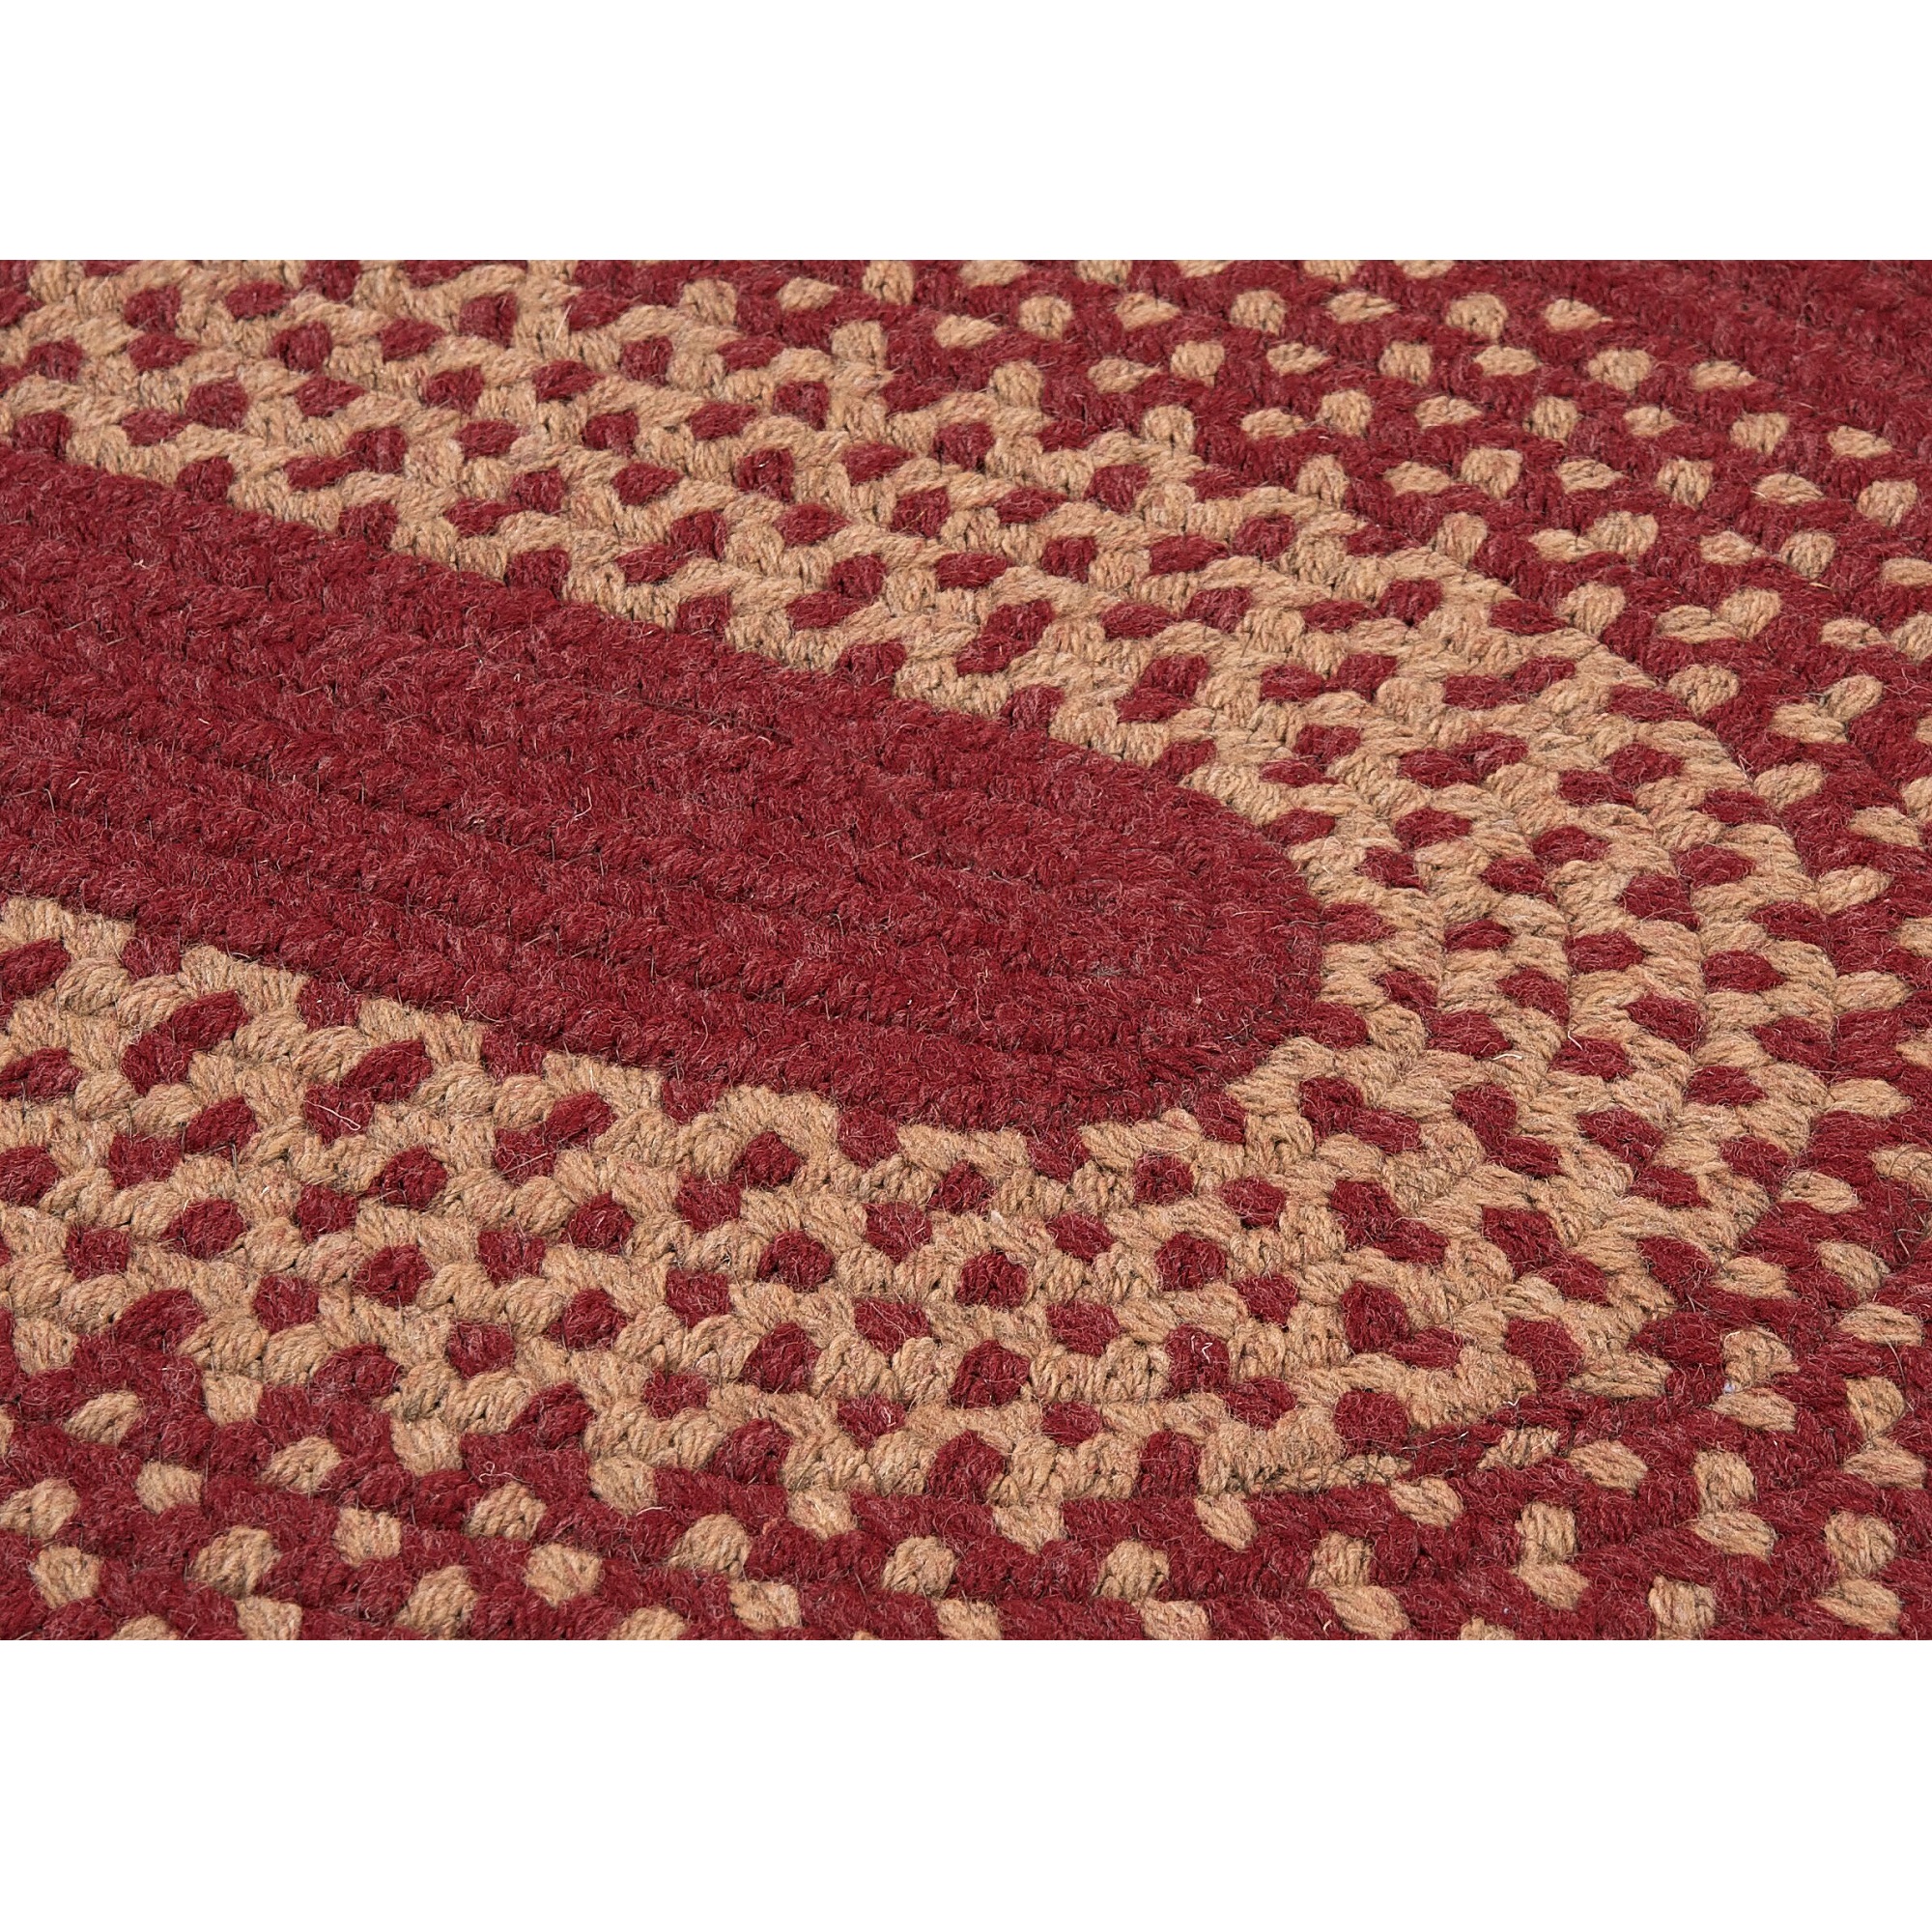 Colonial Mills 2' x 12' Red and Beige Braided Oval Area Throw Rug Runner